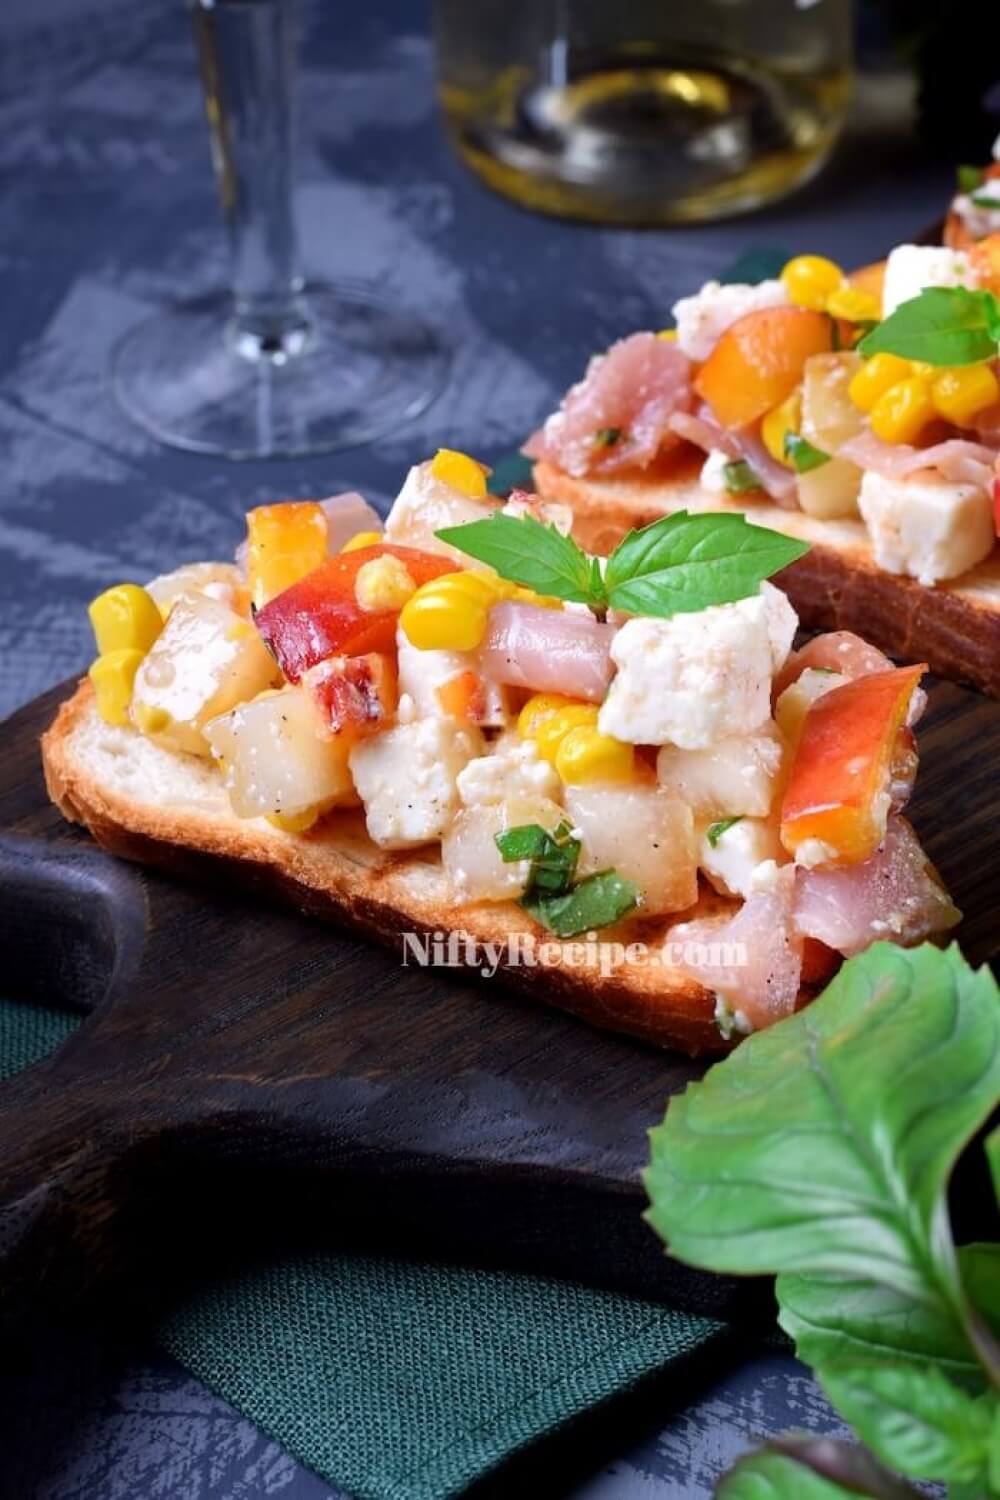 Bruschetta with Grilled Melon and Corn Salad